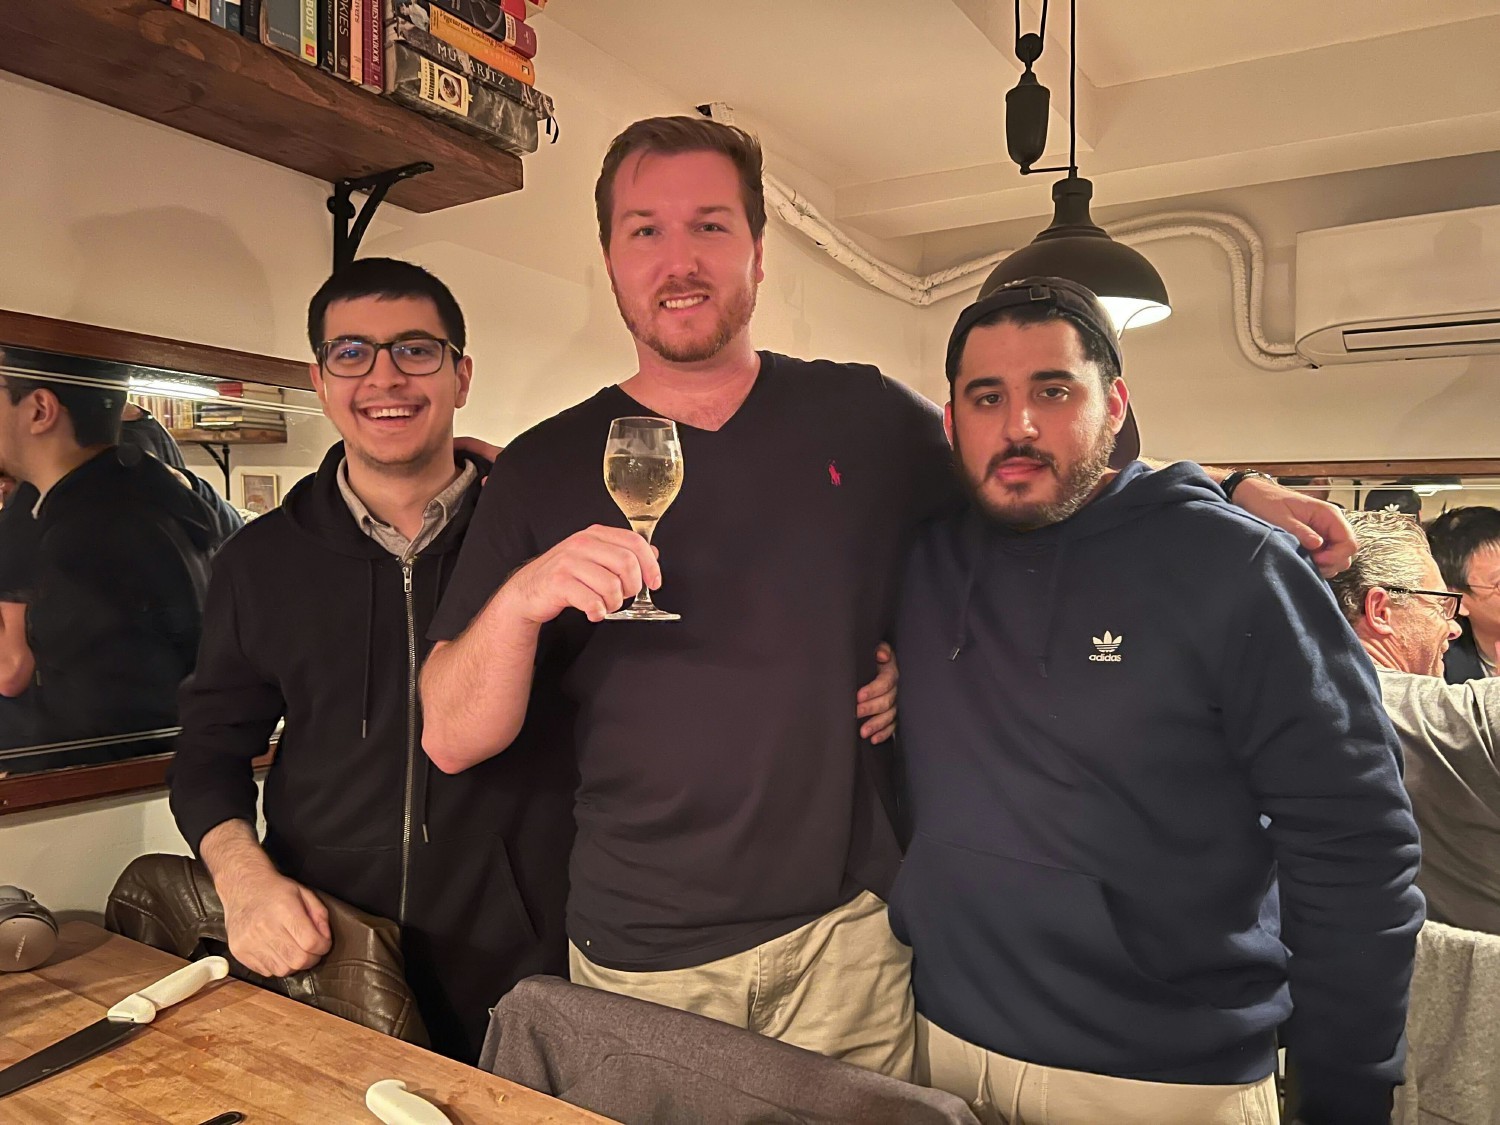 Our Lead QA Engineer, Lead Infrastructure Engineer, and Marketing Coordinator in NYC